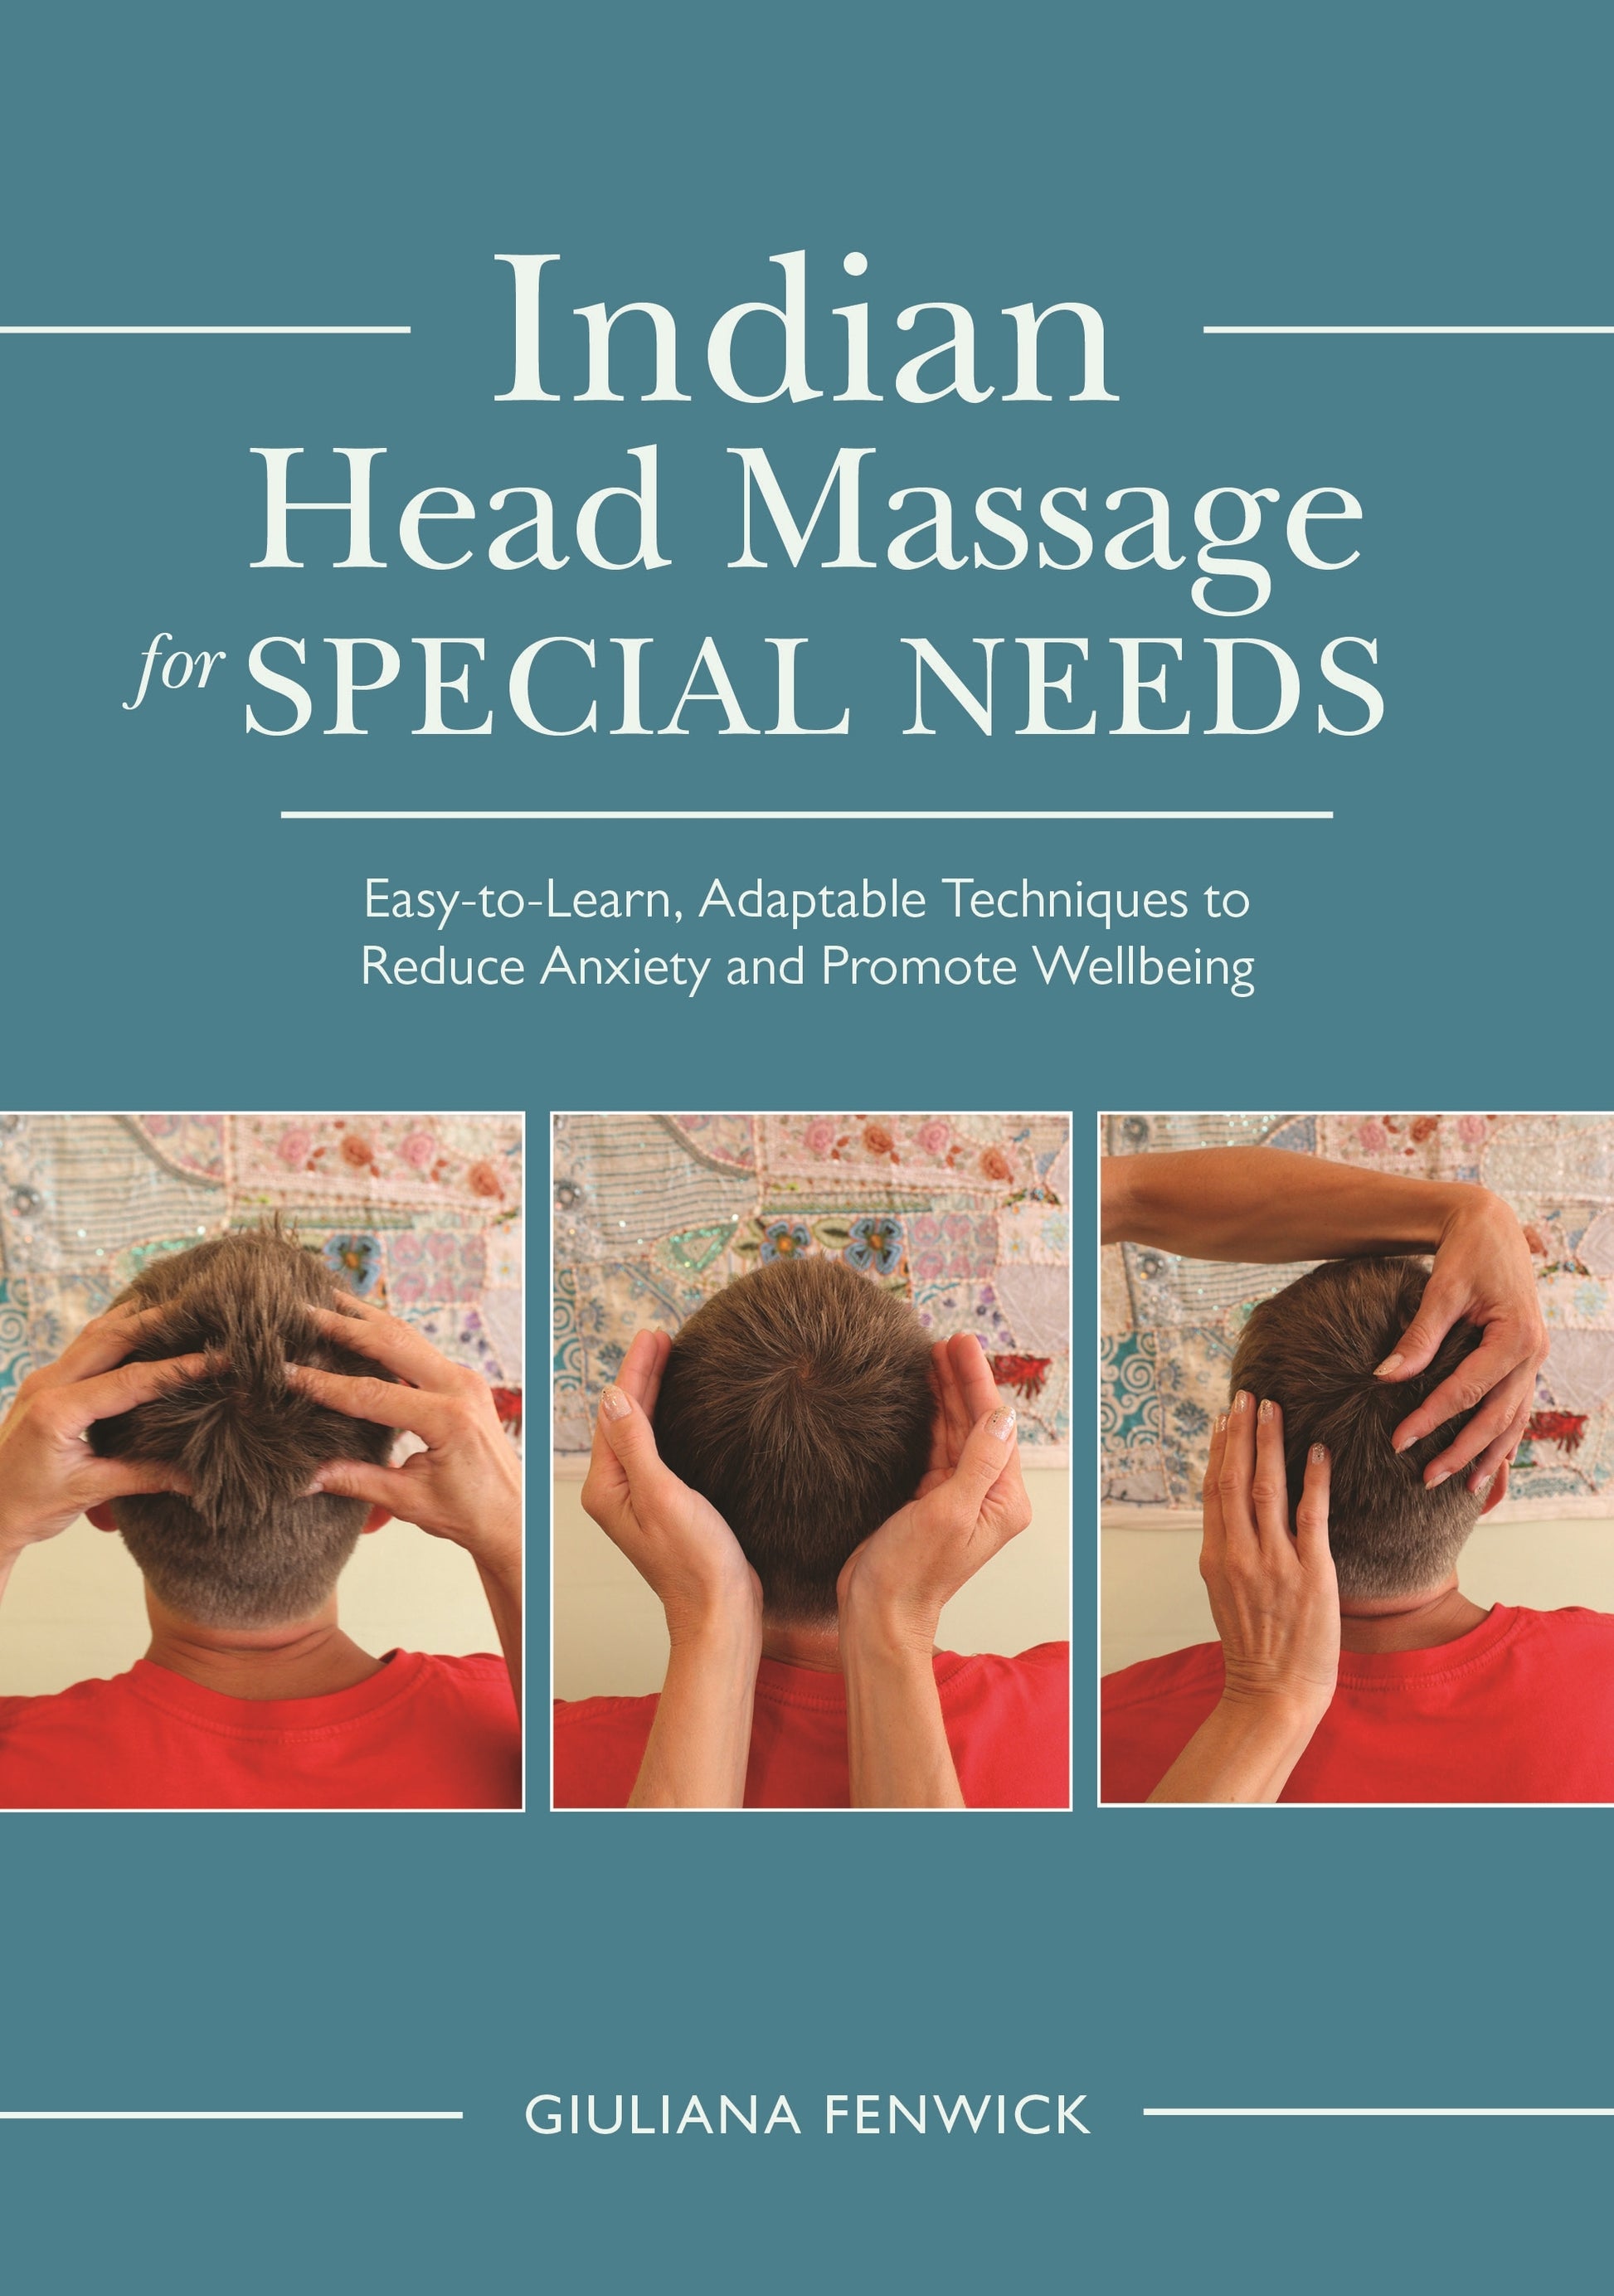 Indian Head Massage for Special Needs by Giuliana Fenwick